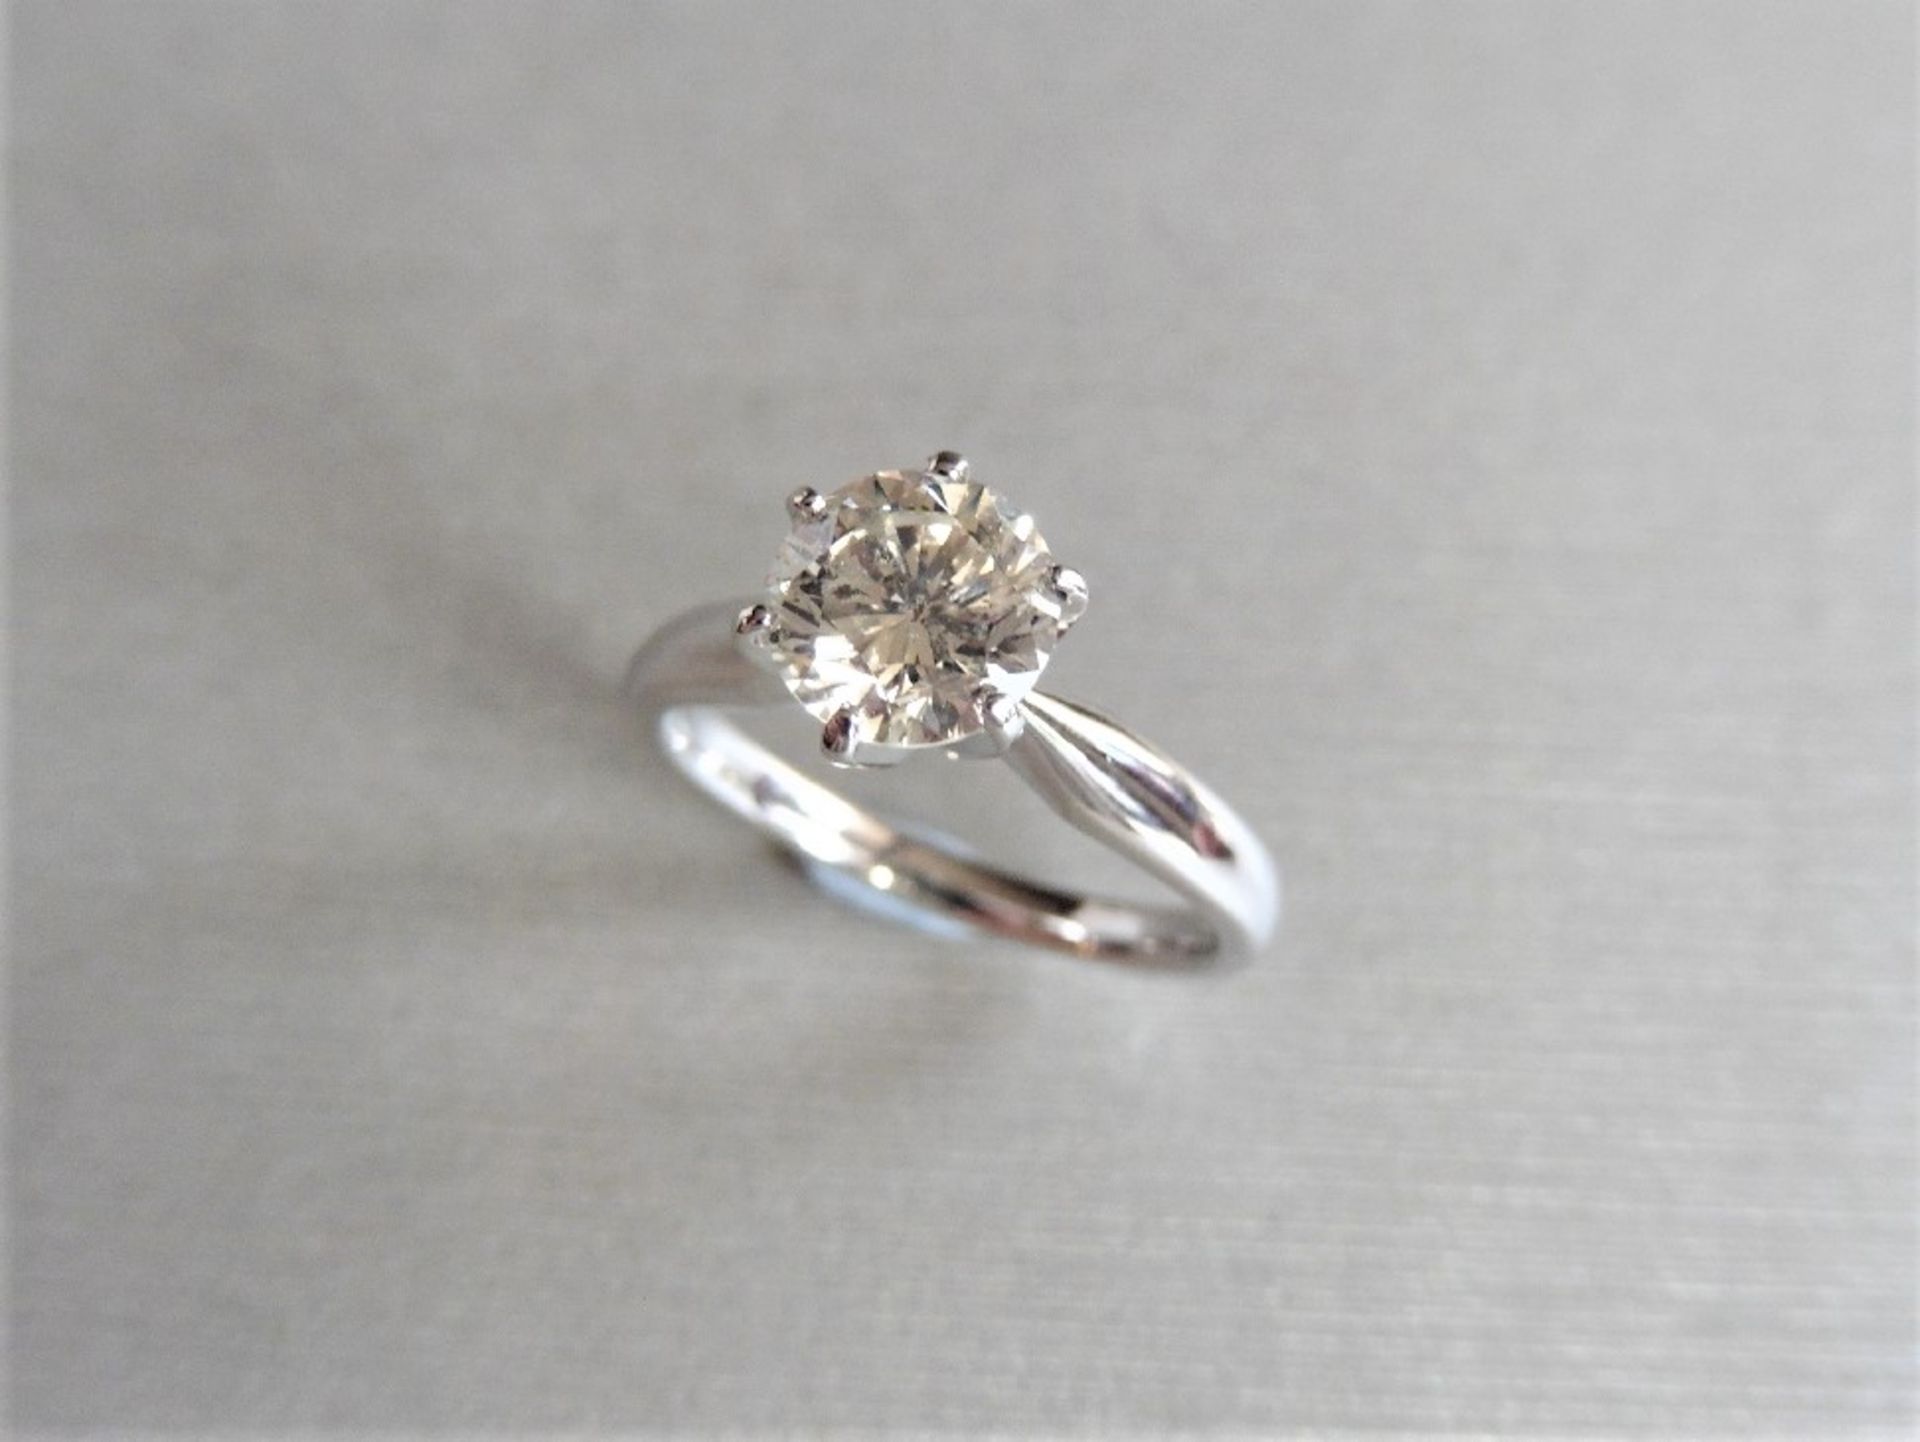 1.09ct diamond solitaire ring set in 18ct gold. Brilliant cut diamond G colour and SI2 clarity. (